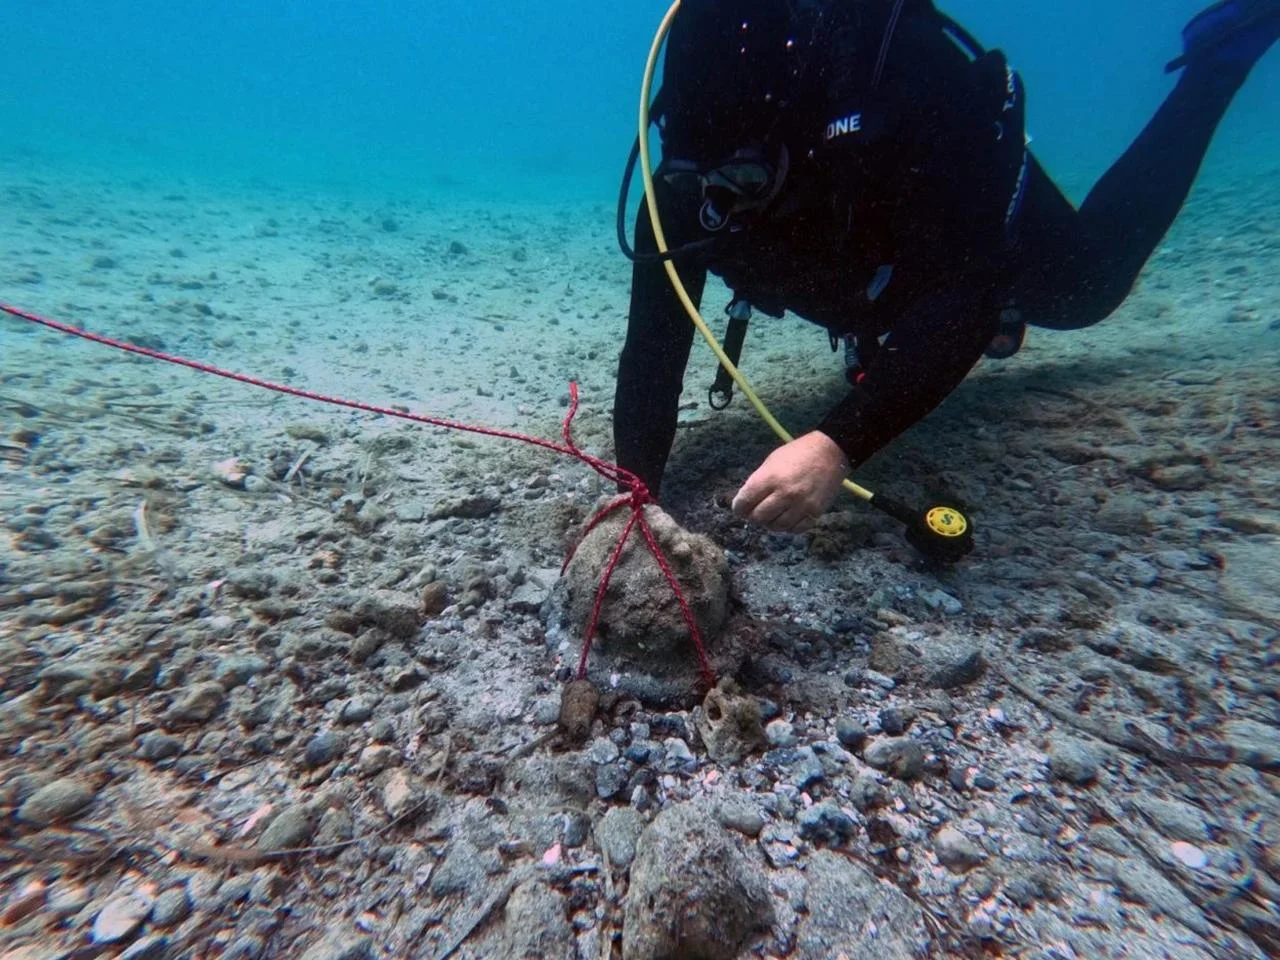 Archaeologists recover late medieval helmet off Sicilian coast